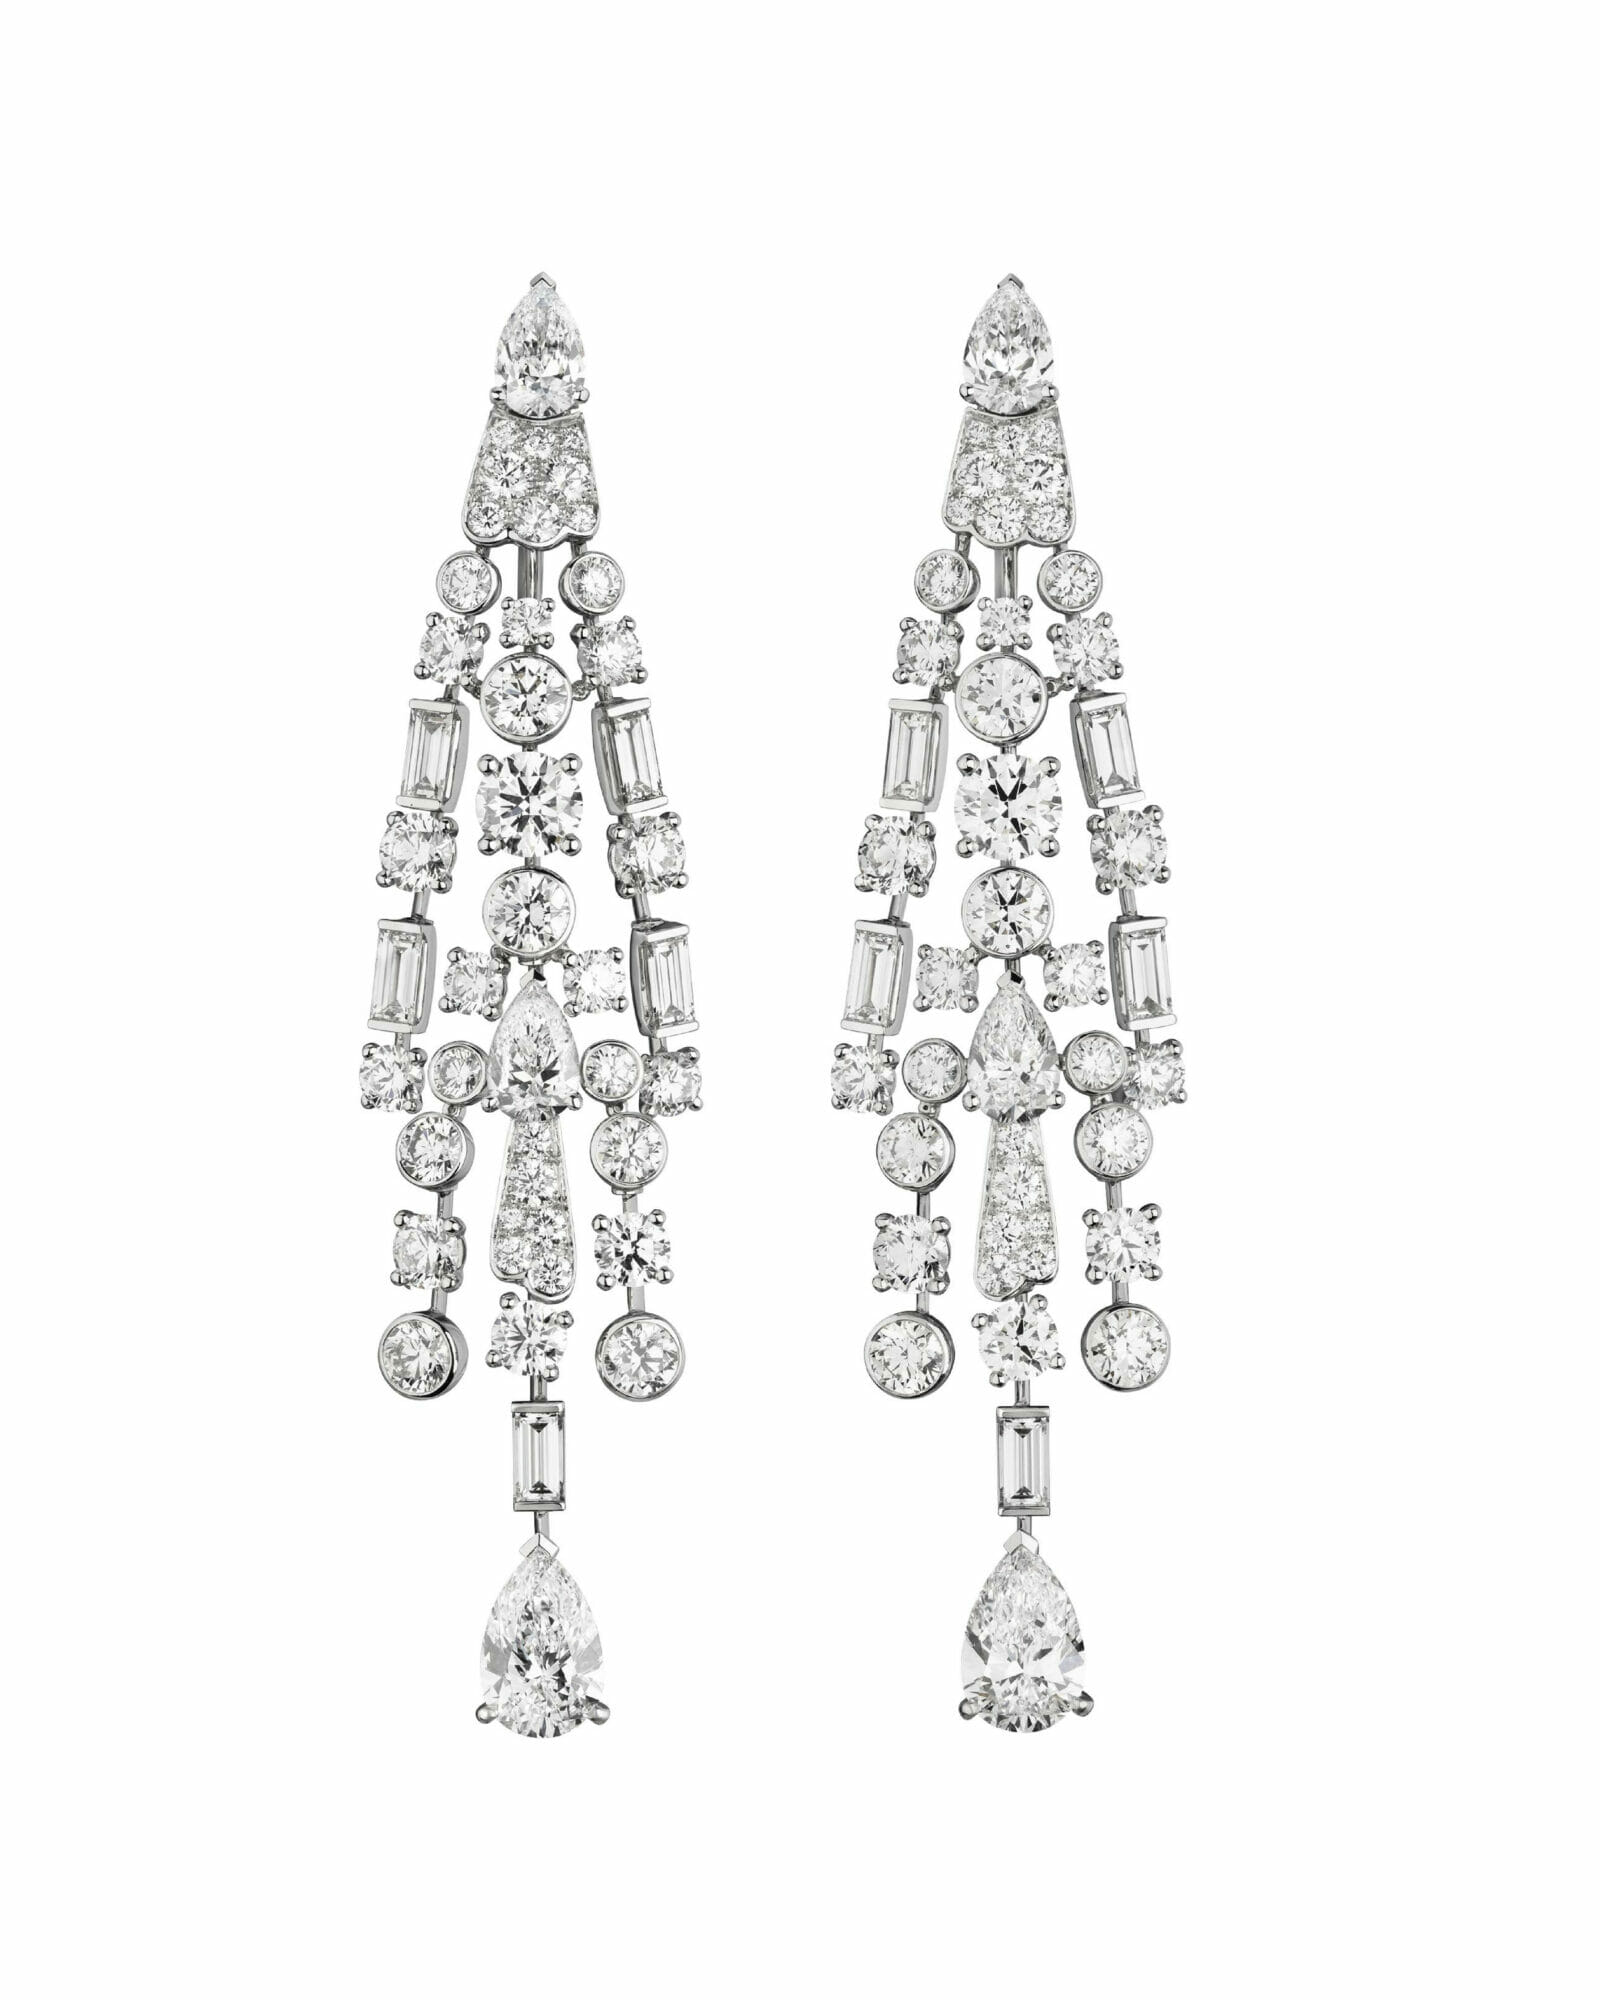 Chanel Jewelry Turns To Natural Diamonds For The New Collection